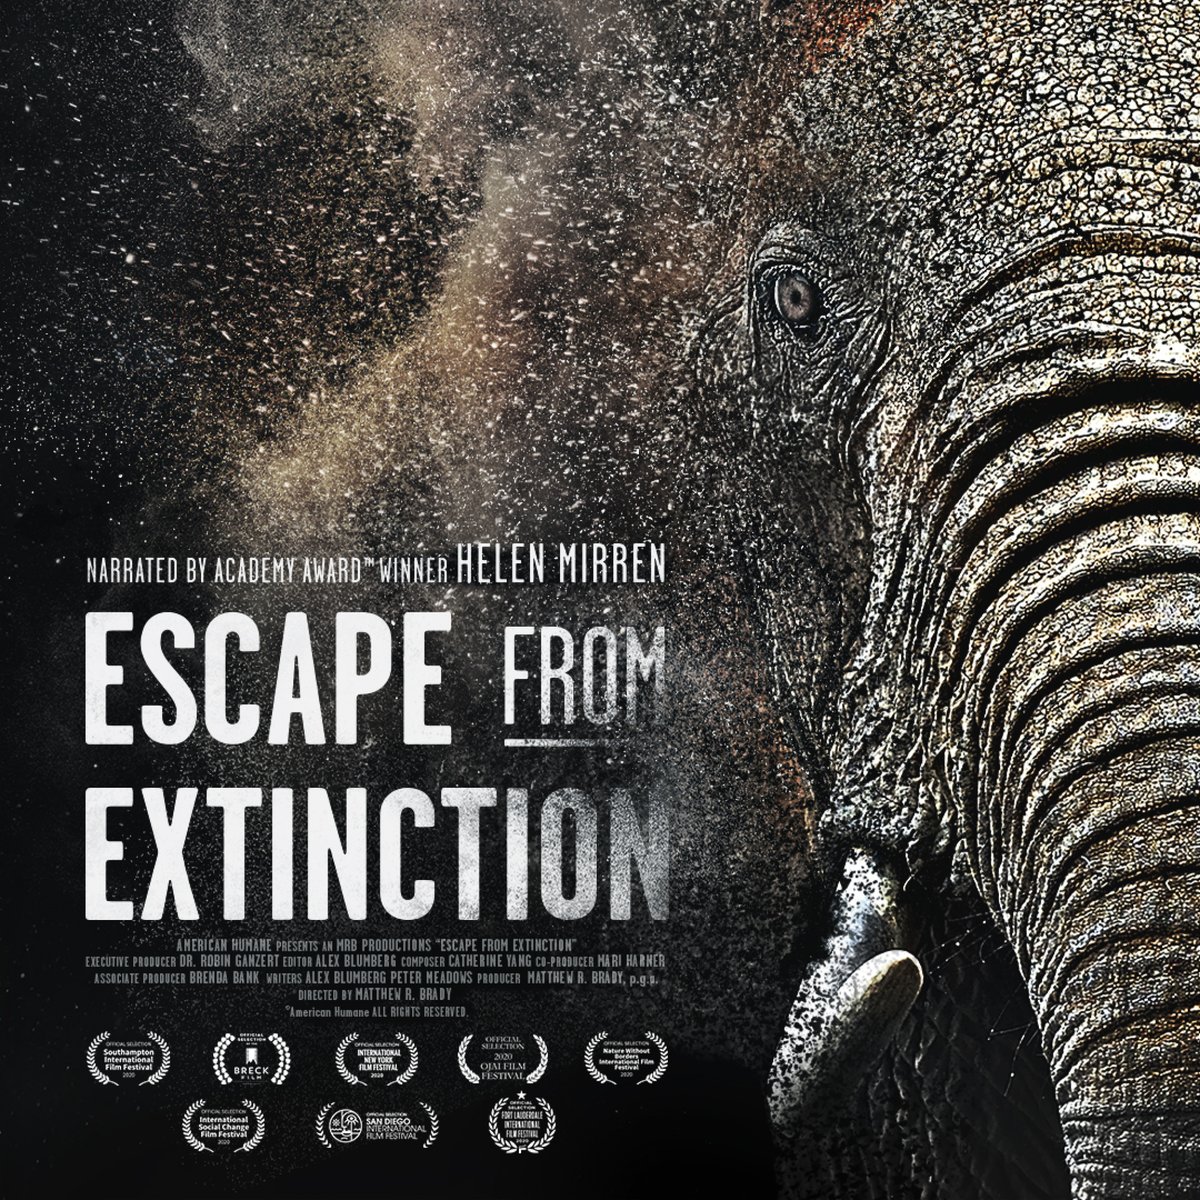 In ESCAPE FROM EXTINCTION, journey around the world for an exclusive look at the animals, inner workings, and efforts of major zoological organizations preserving the rich legacy of life on our planet. Showing at CMX Brickell and CMX Dolphin. #CMXCinemas #EscapefromExtinction